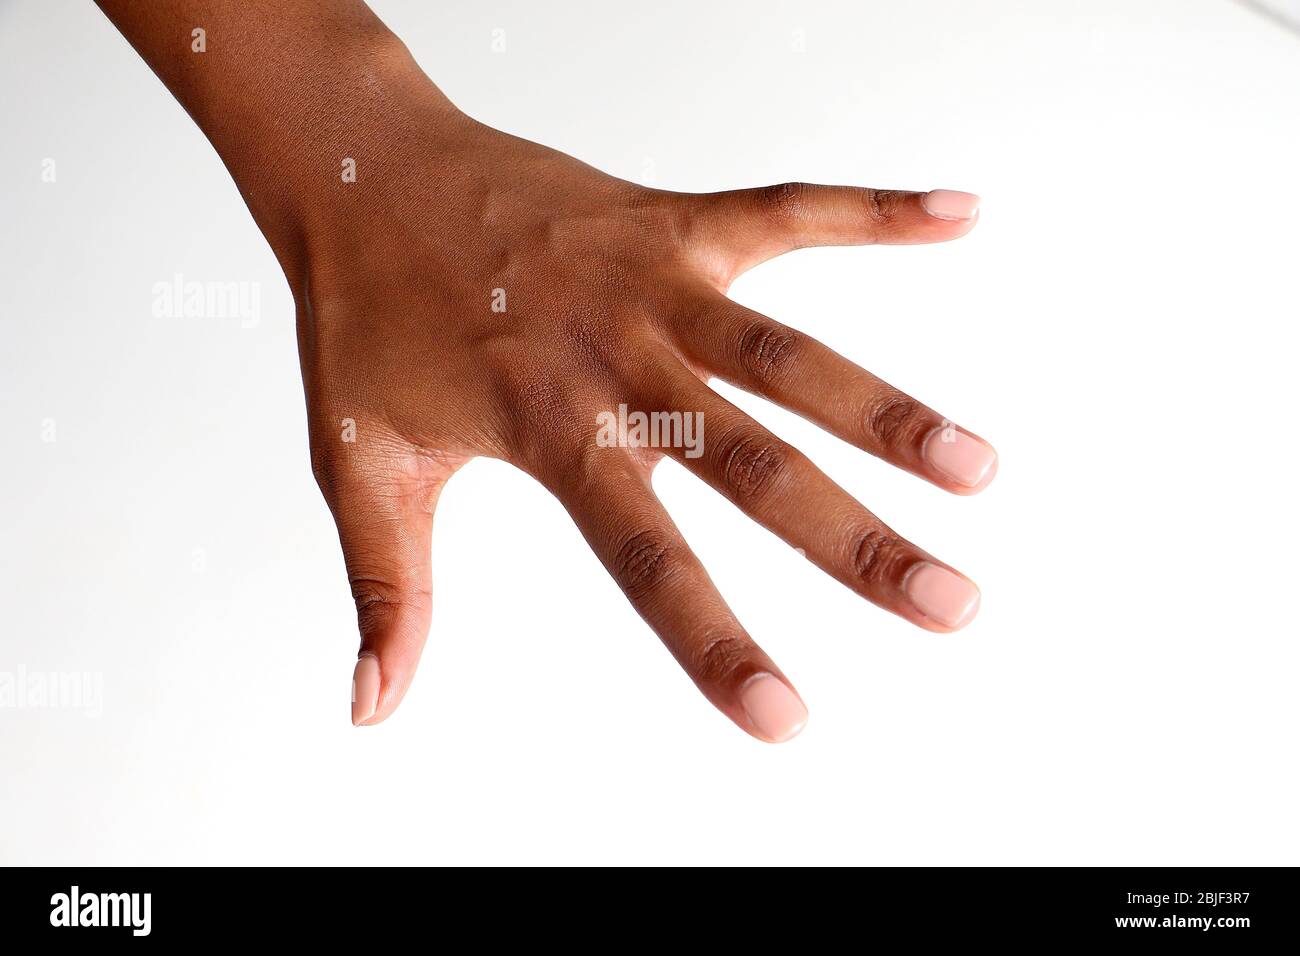 Isolated female black african indian hand facing downwards showing manicured nails Stock Photo